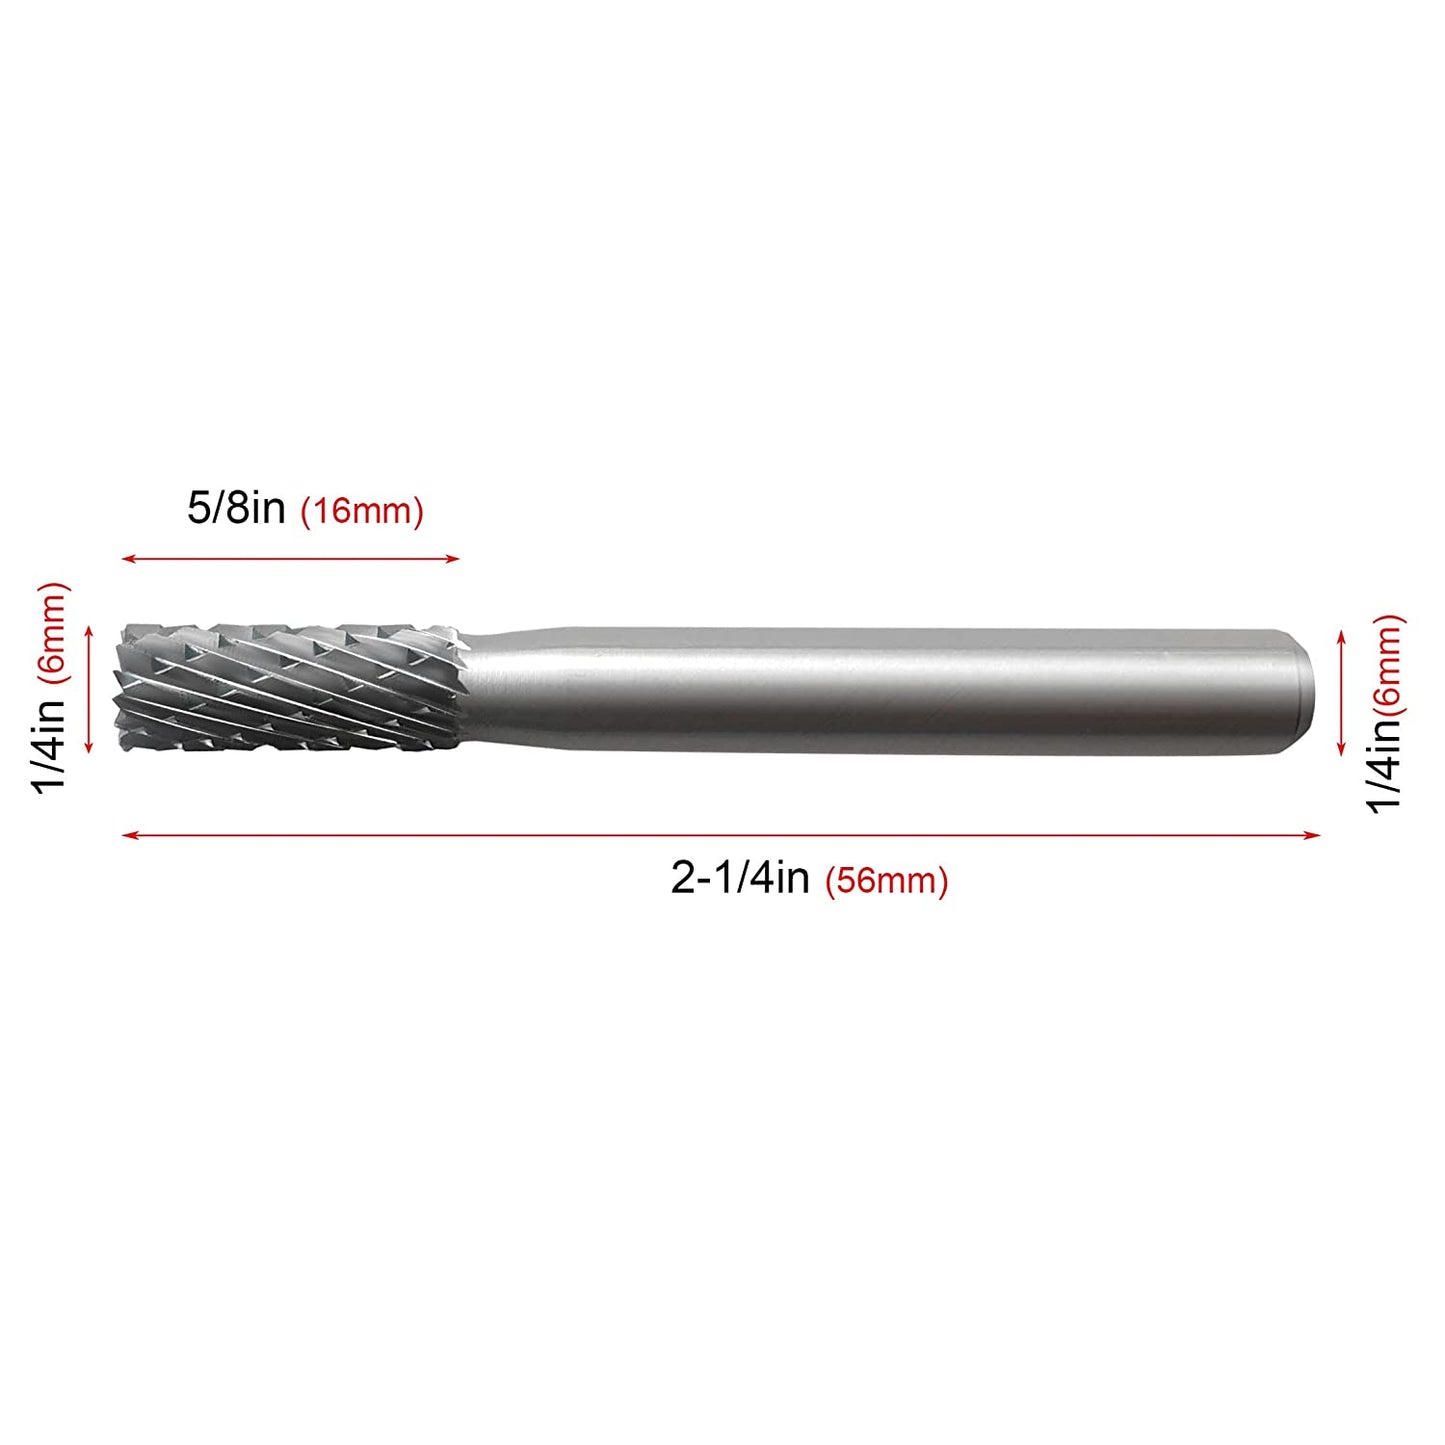 HAUTMEC Cylinder Tungsten Rotary File Carbide Burr 1/4'' Shank,1/4'' Head Length Double Cut for Woodworking,Drilling, Metal Carving, Engraving, Polishing HT0196-MC